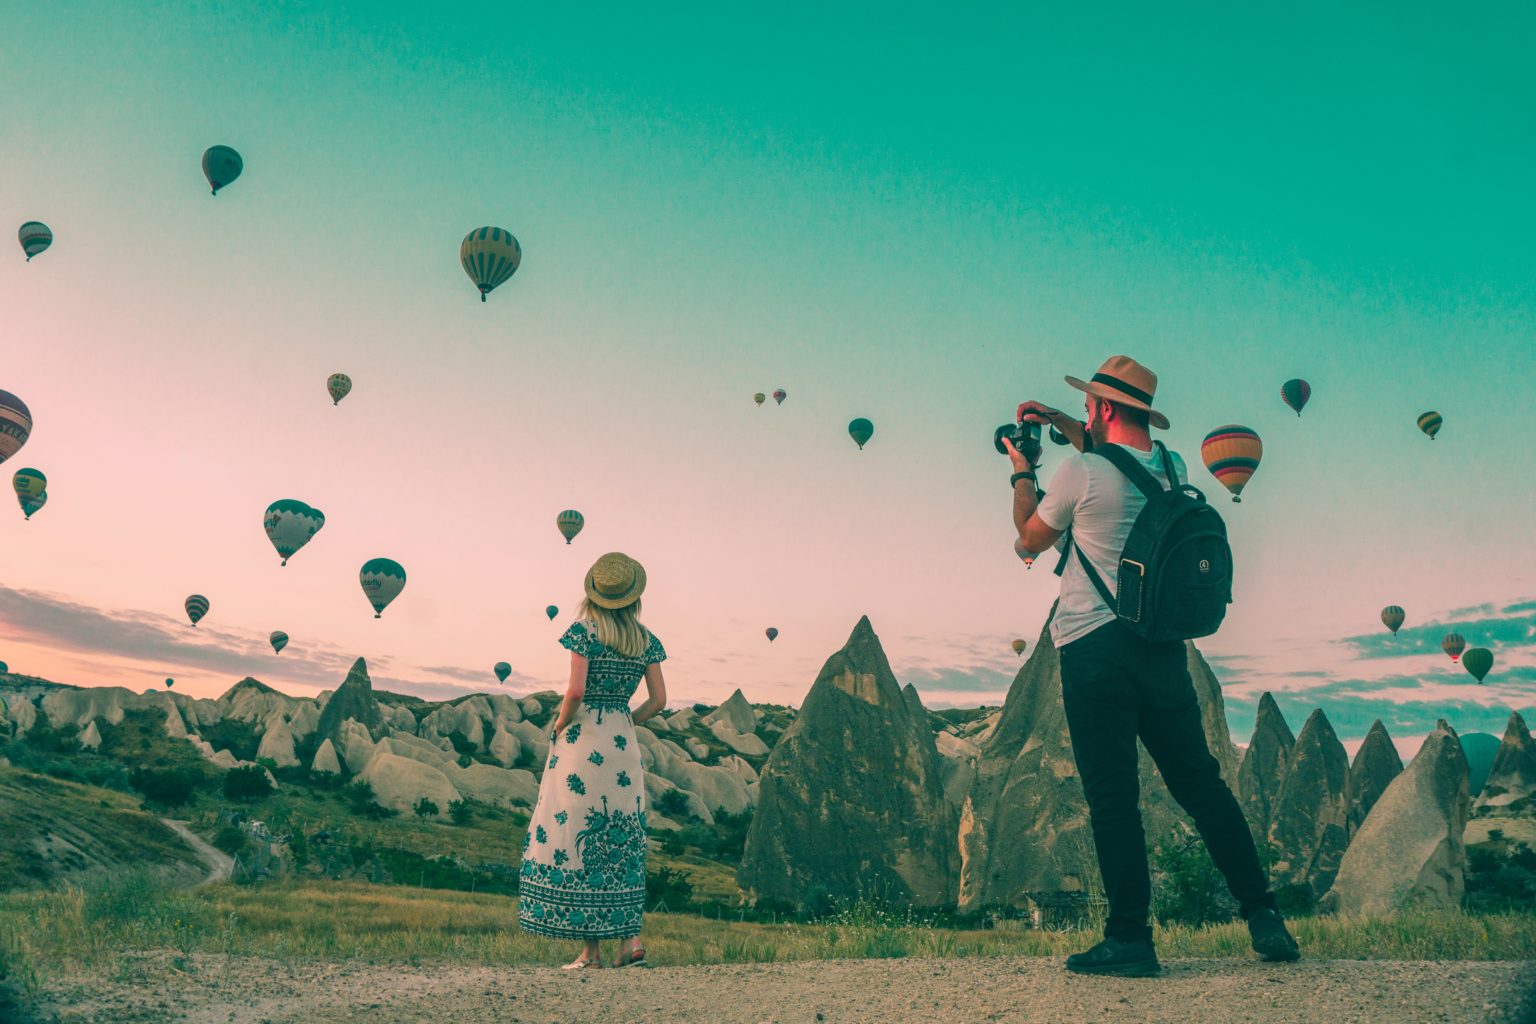 two people taking pictures outside with several hot air balloons in the sky